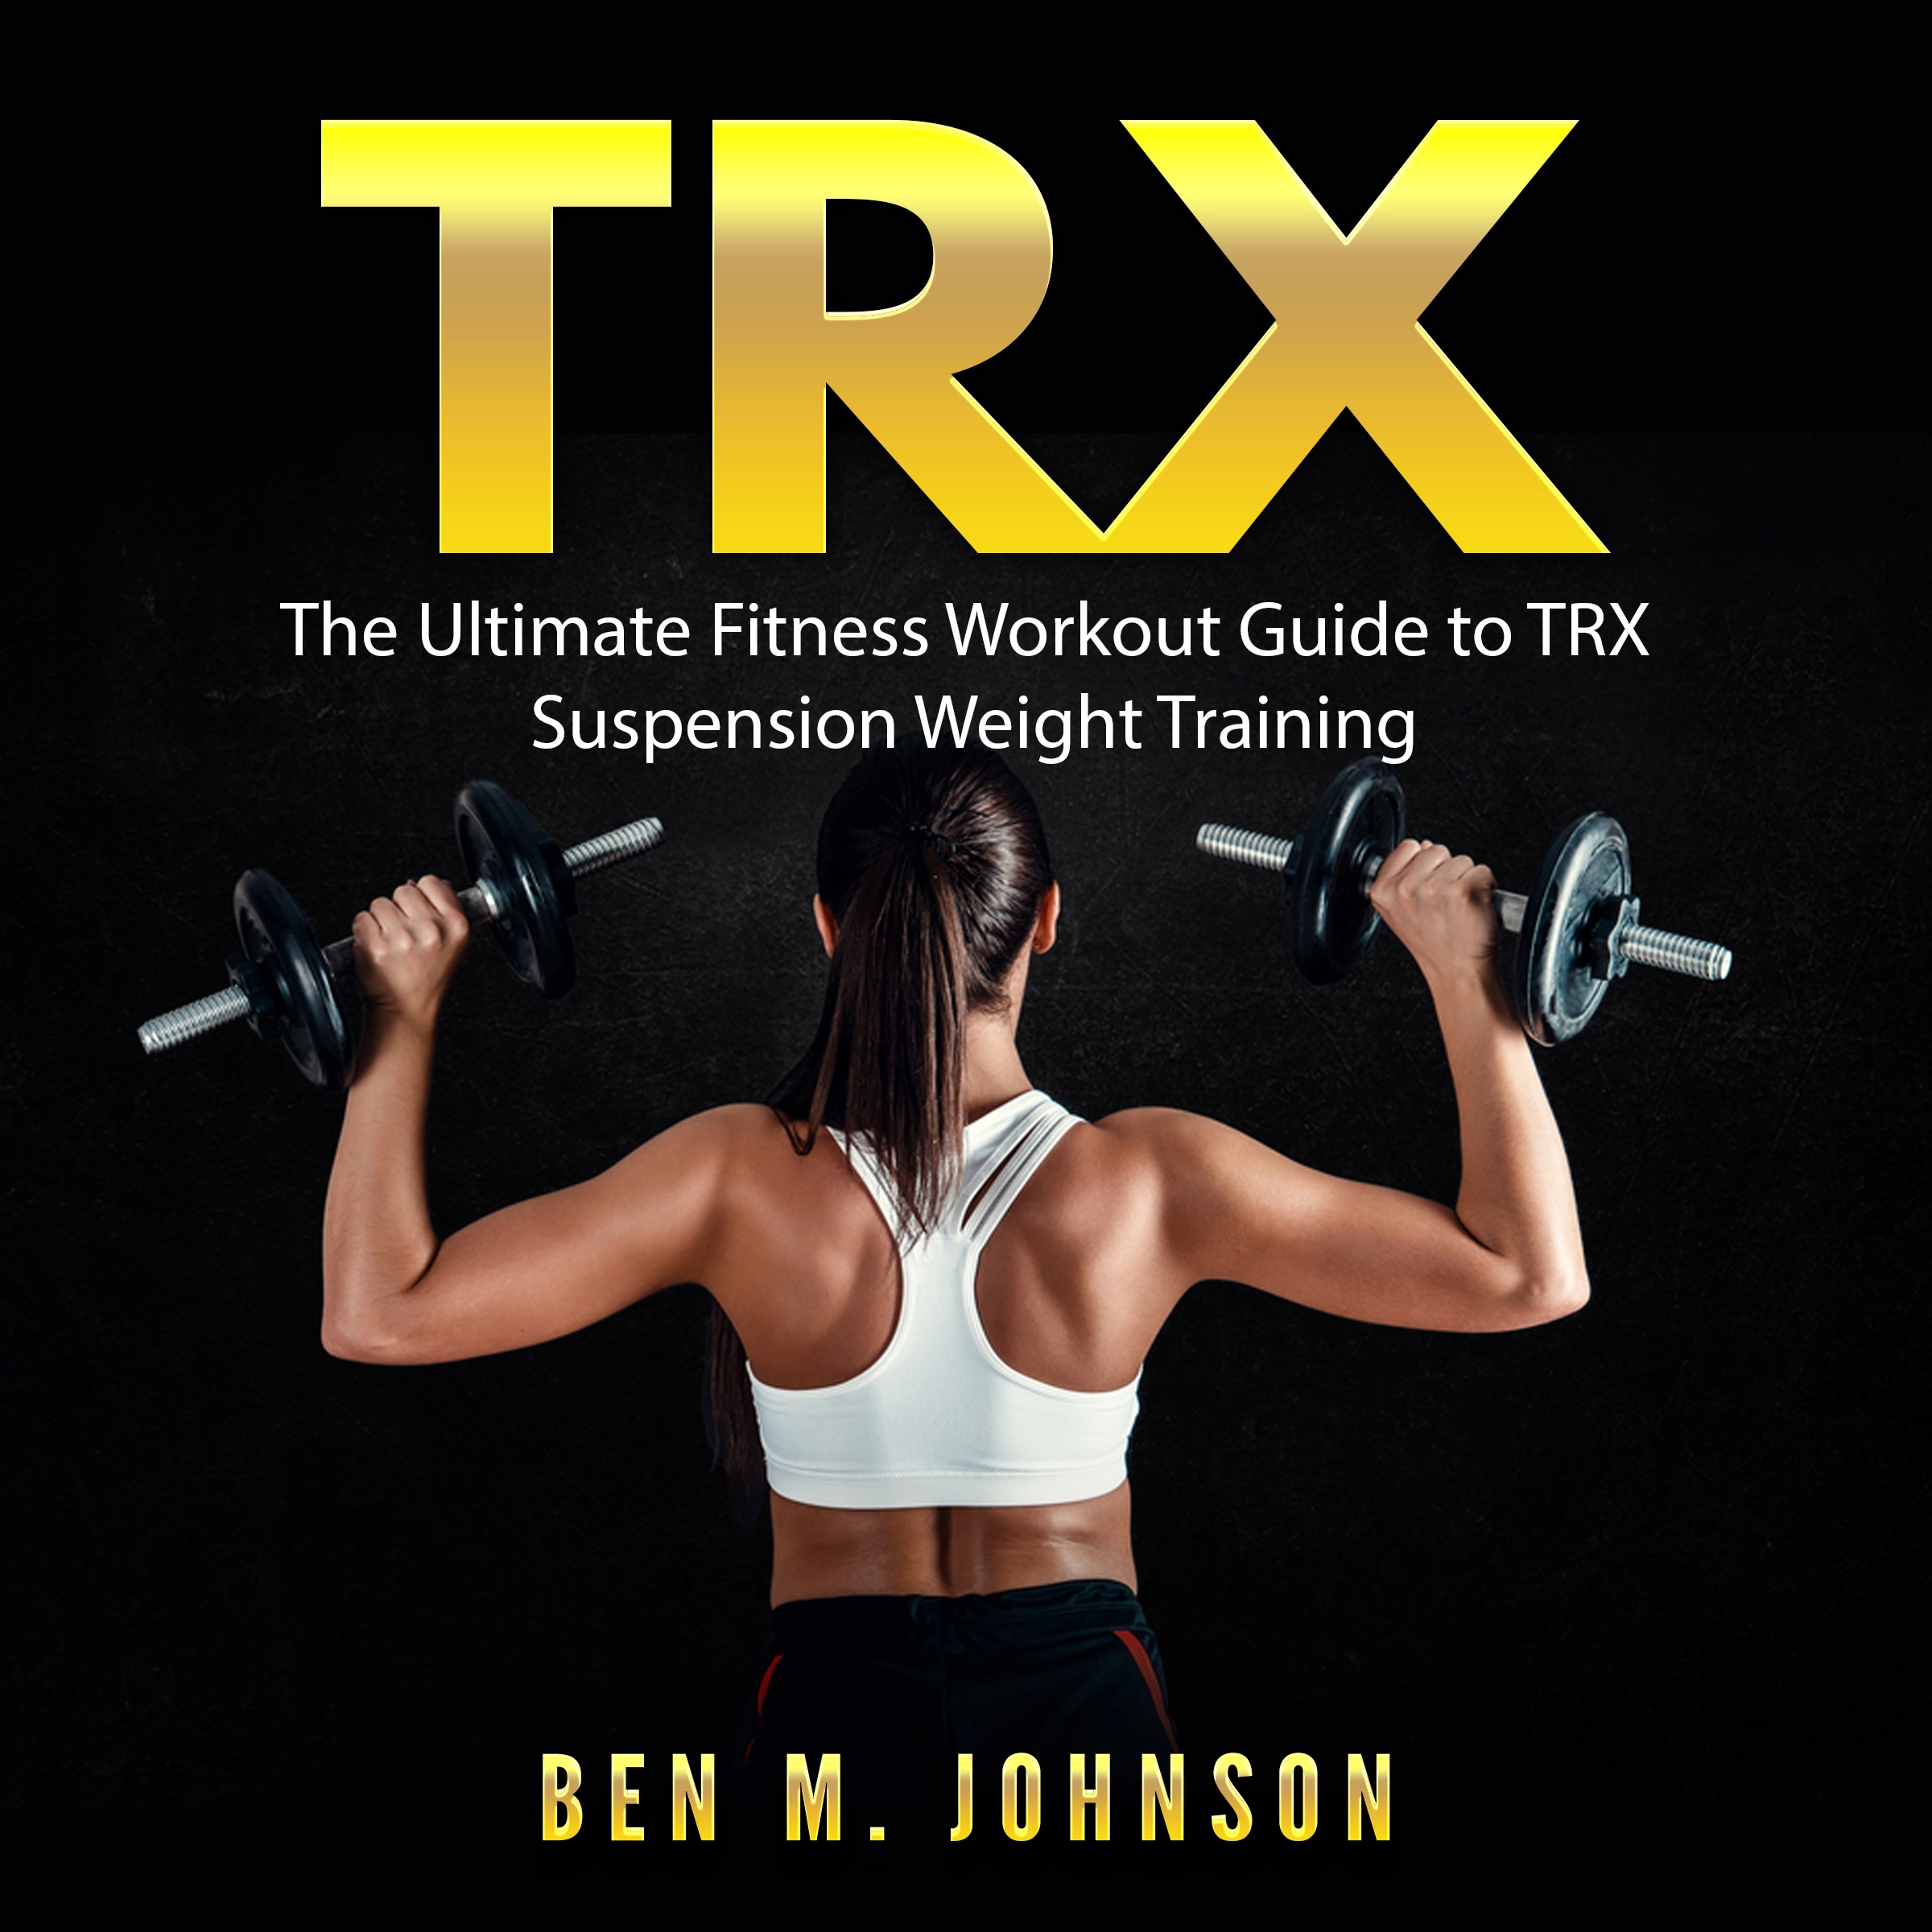 TRX: The Ultimate Fitness Workout Guide to TRX Suspension Weight Training Audiobook by Ben M. Johnson